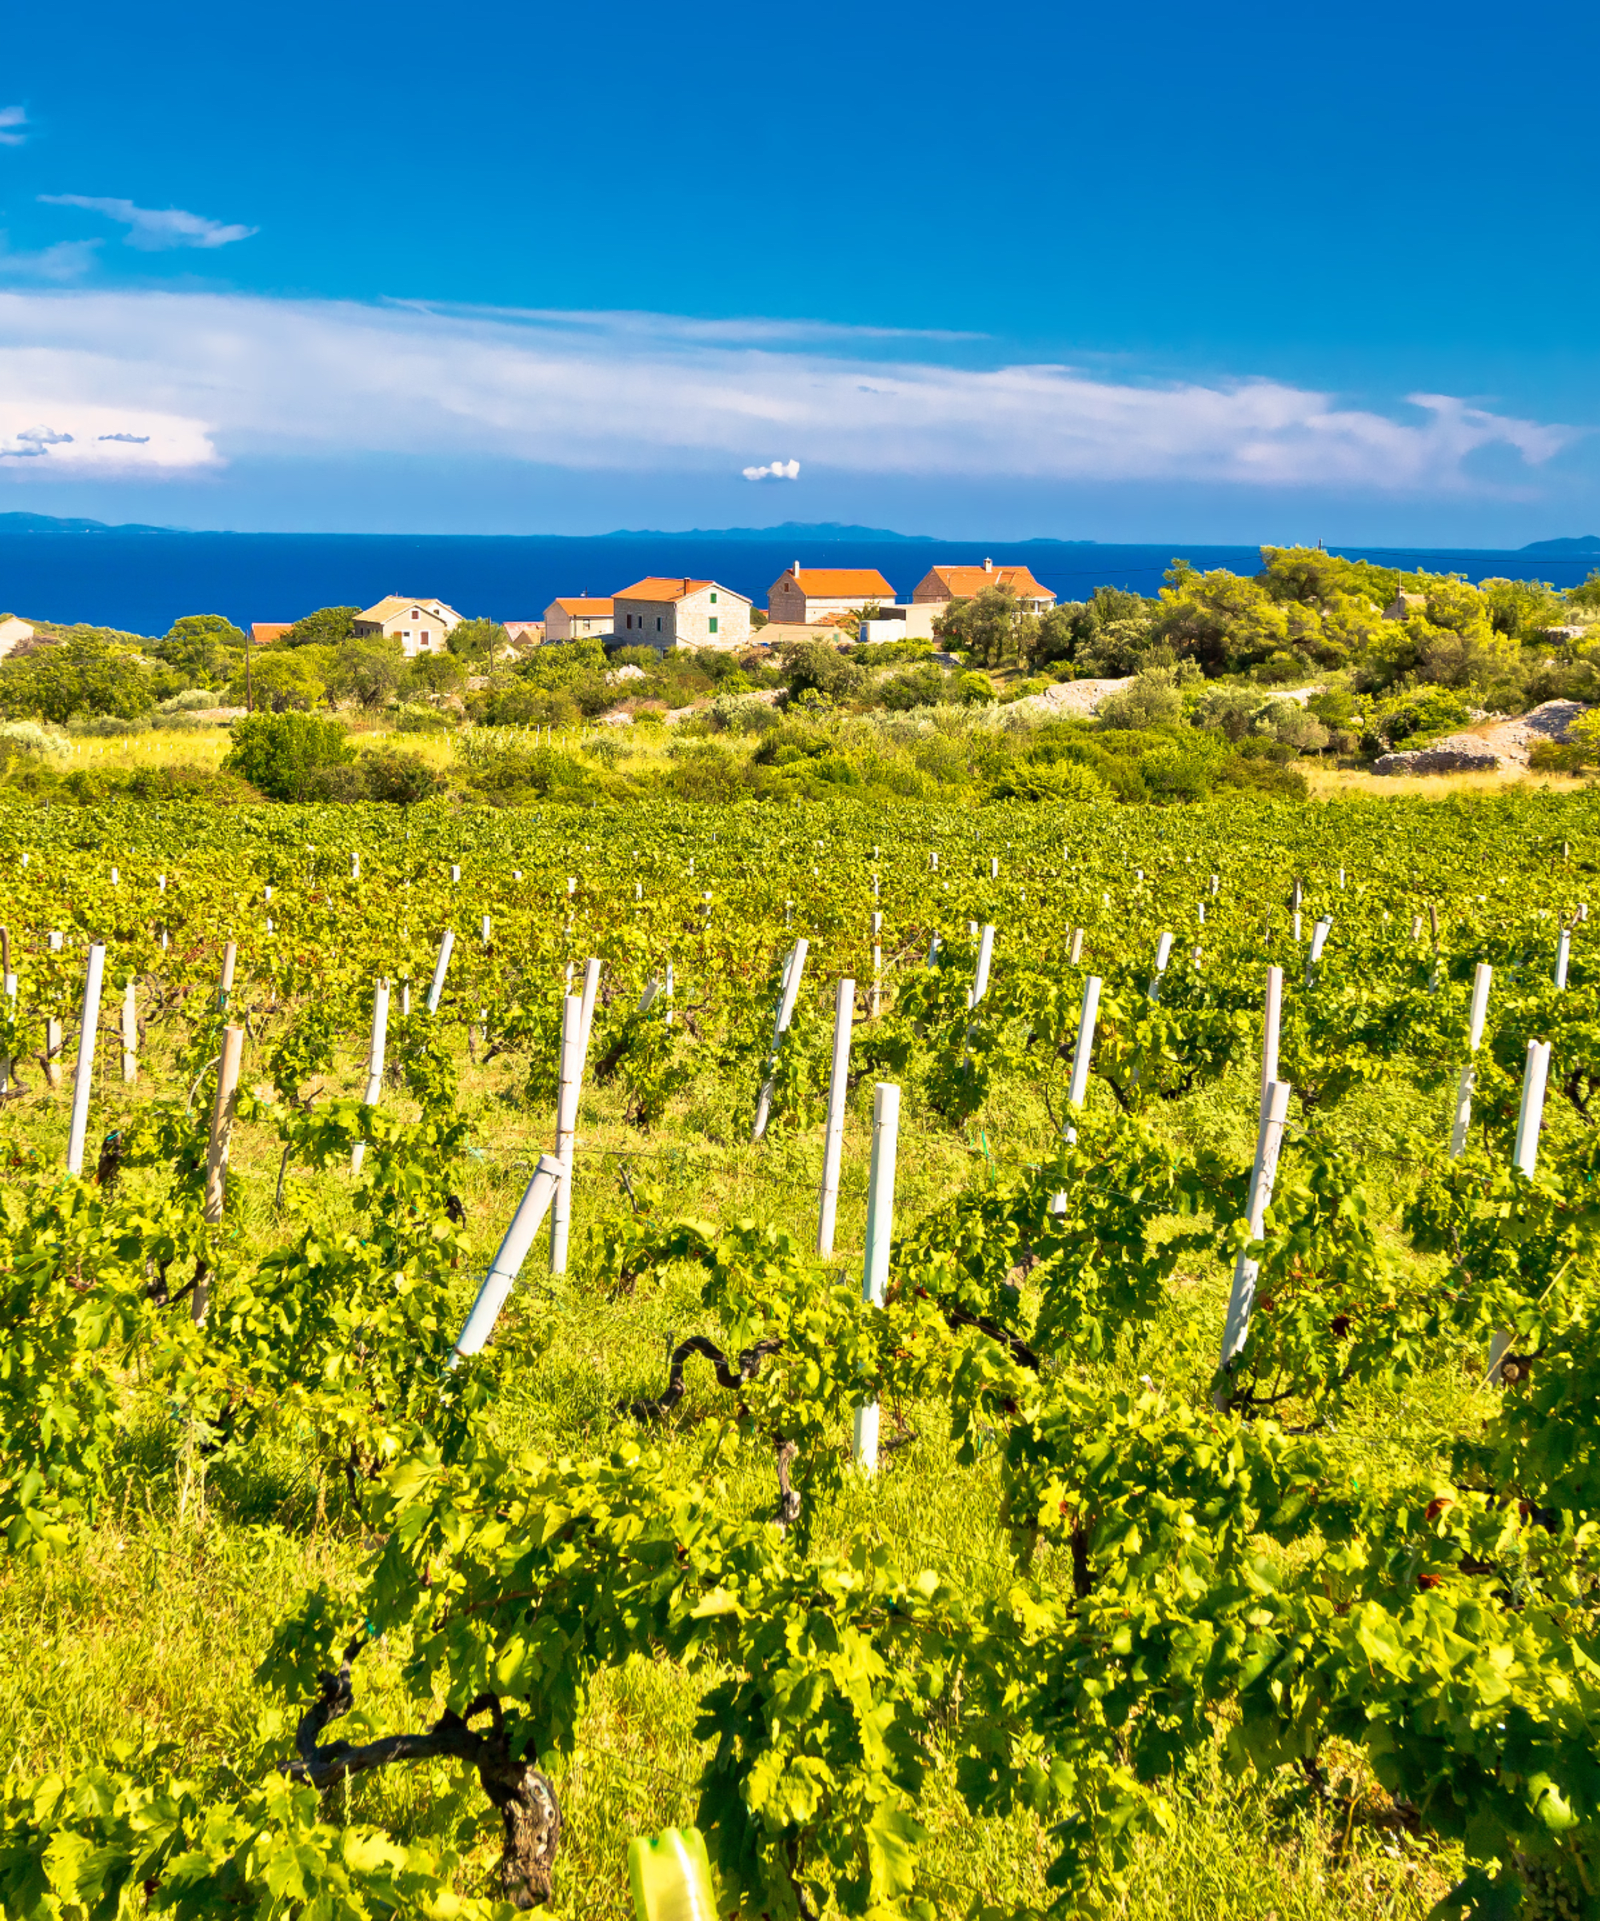 There are a lot of great food and wine tours to go on in Croatia